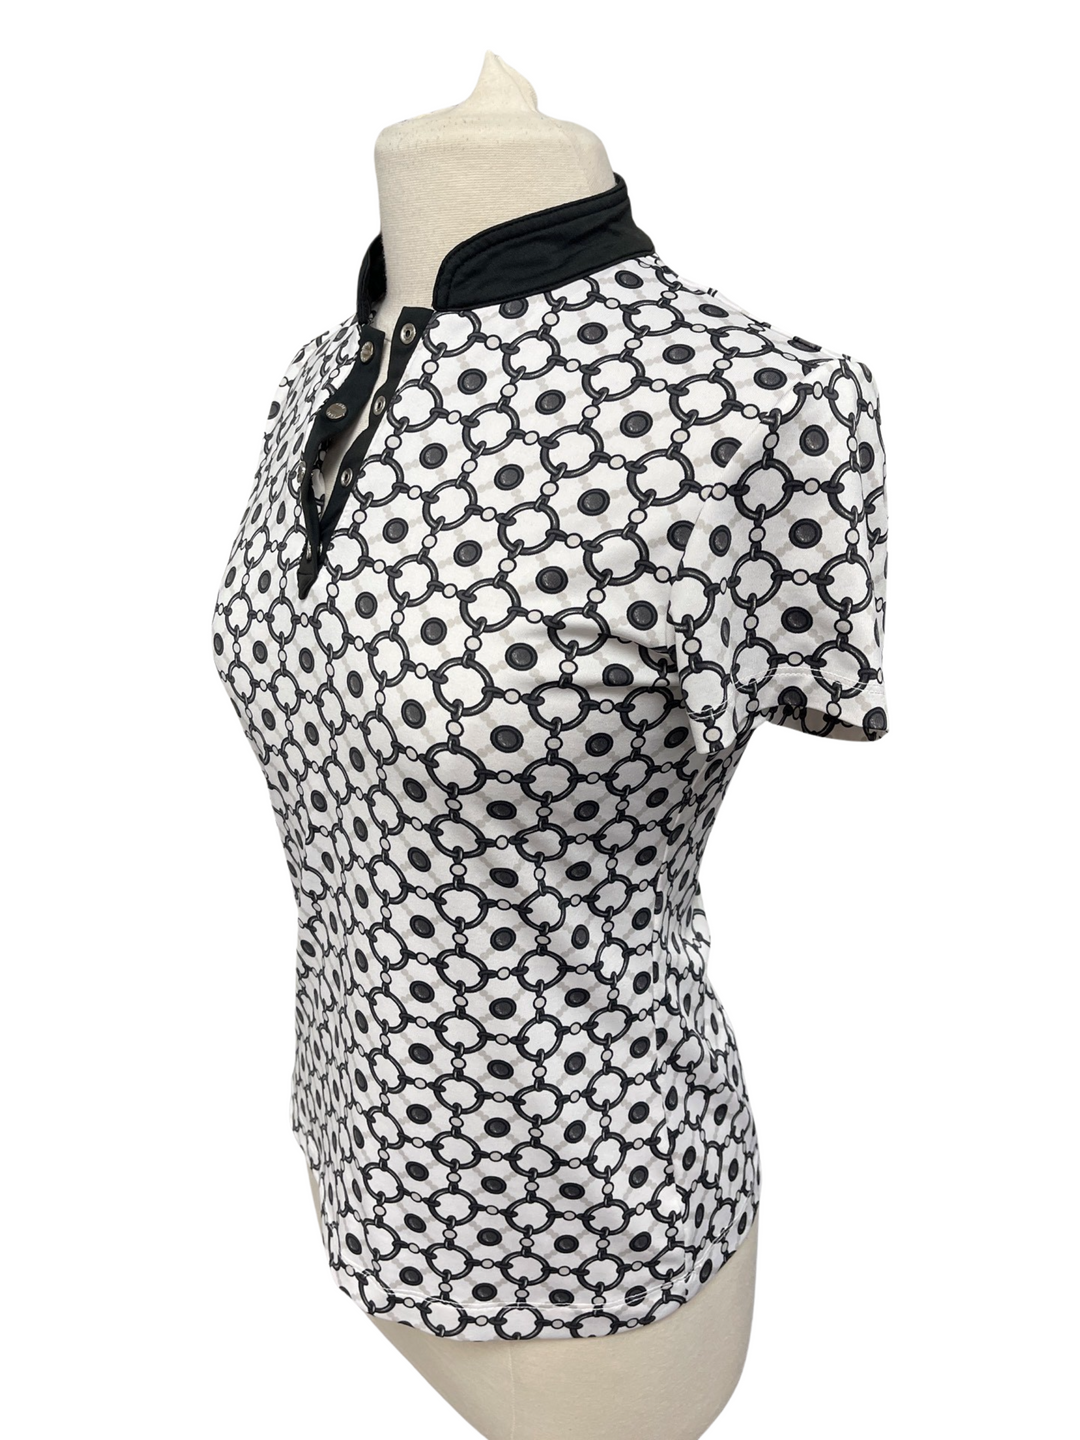 Tail Short Sleeve Black and White Golf Top- Small